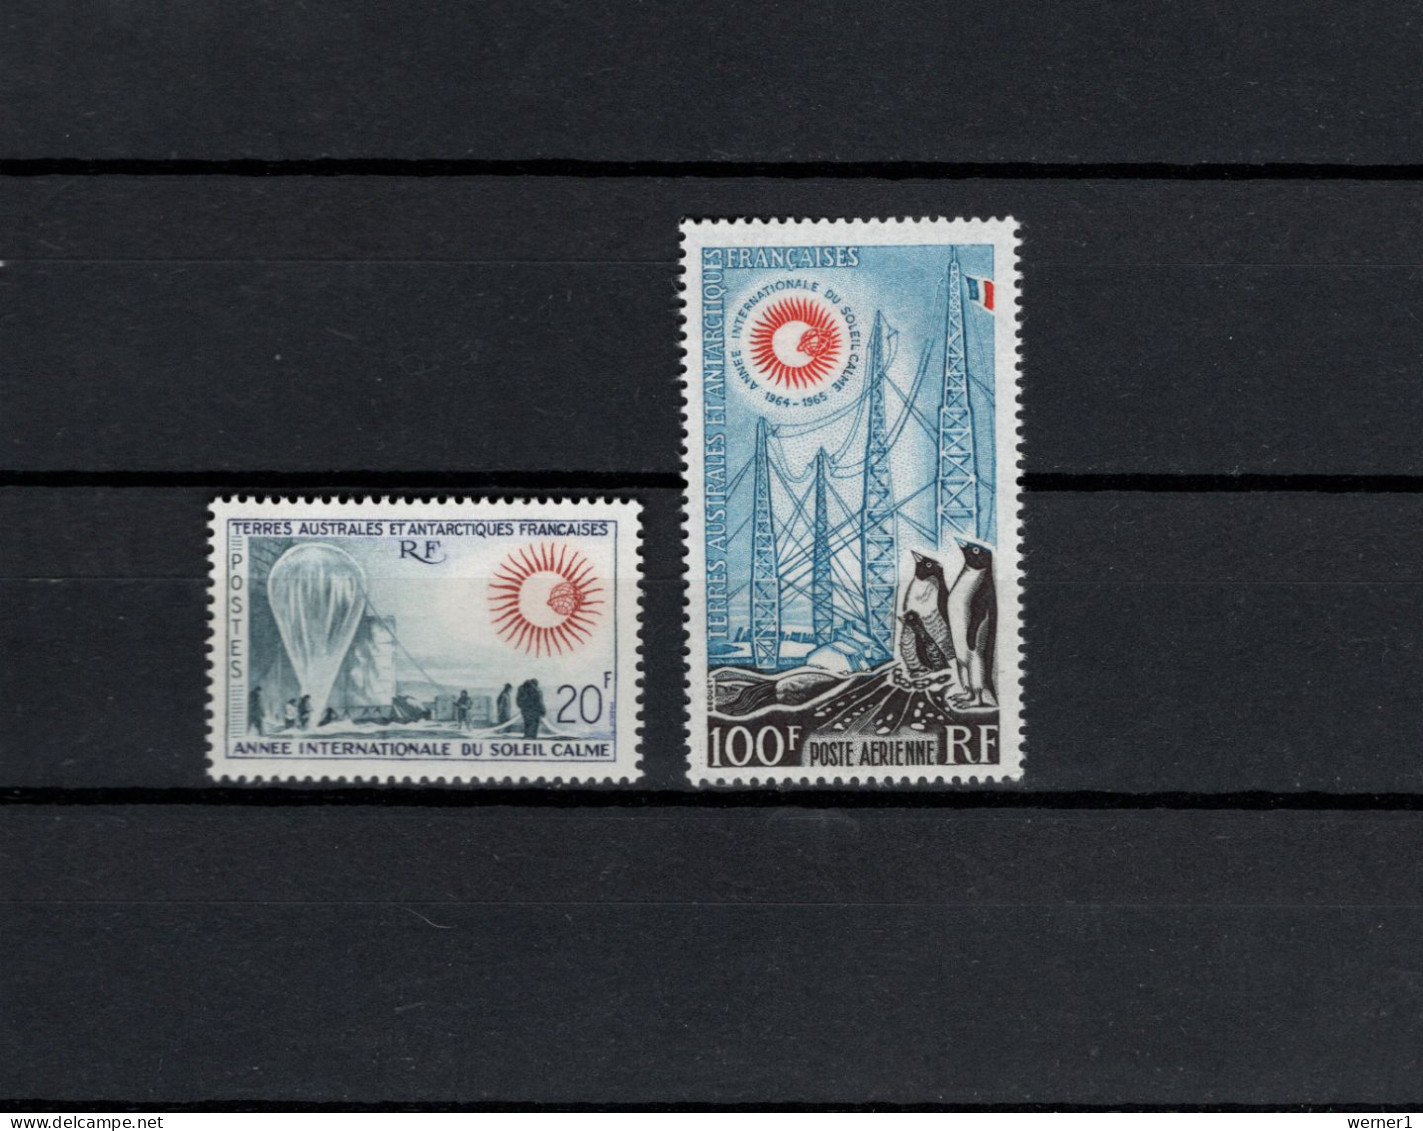 FSAT French Antarctic Territory 1963 Space, International Year Of The Quiet Sun Set Of 2 MNH -scarce- - Oceanía